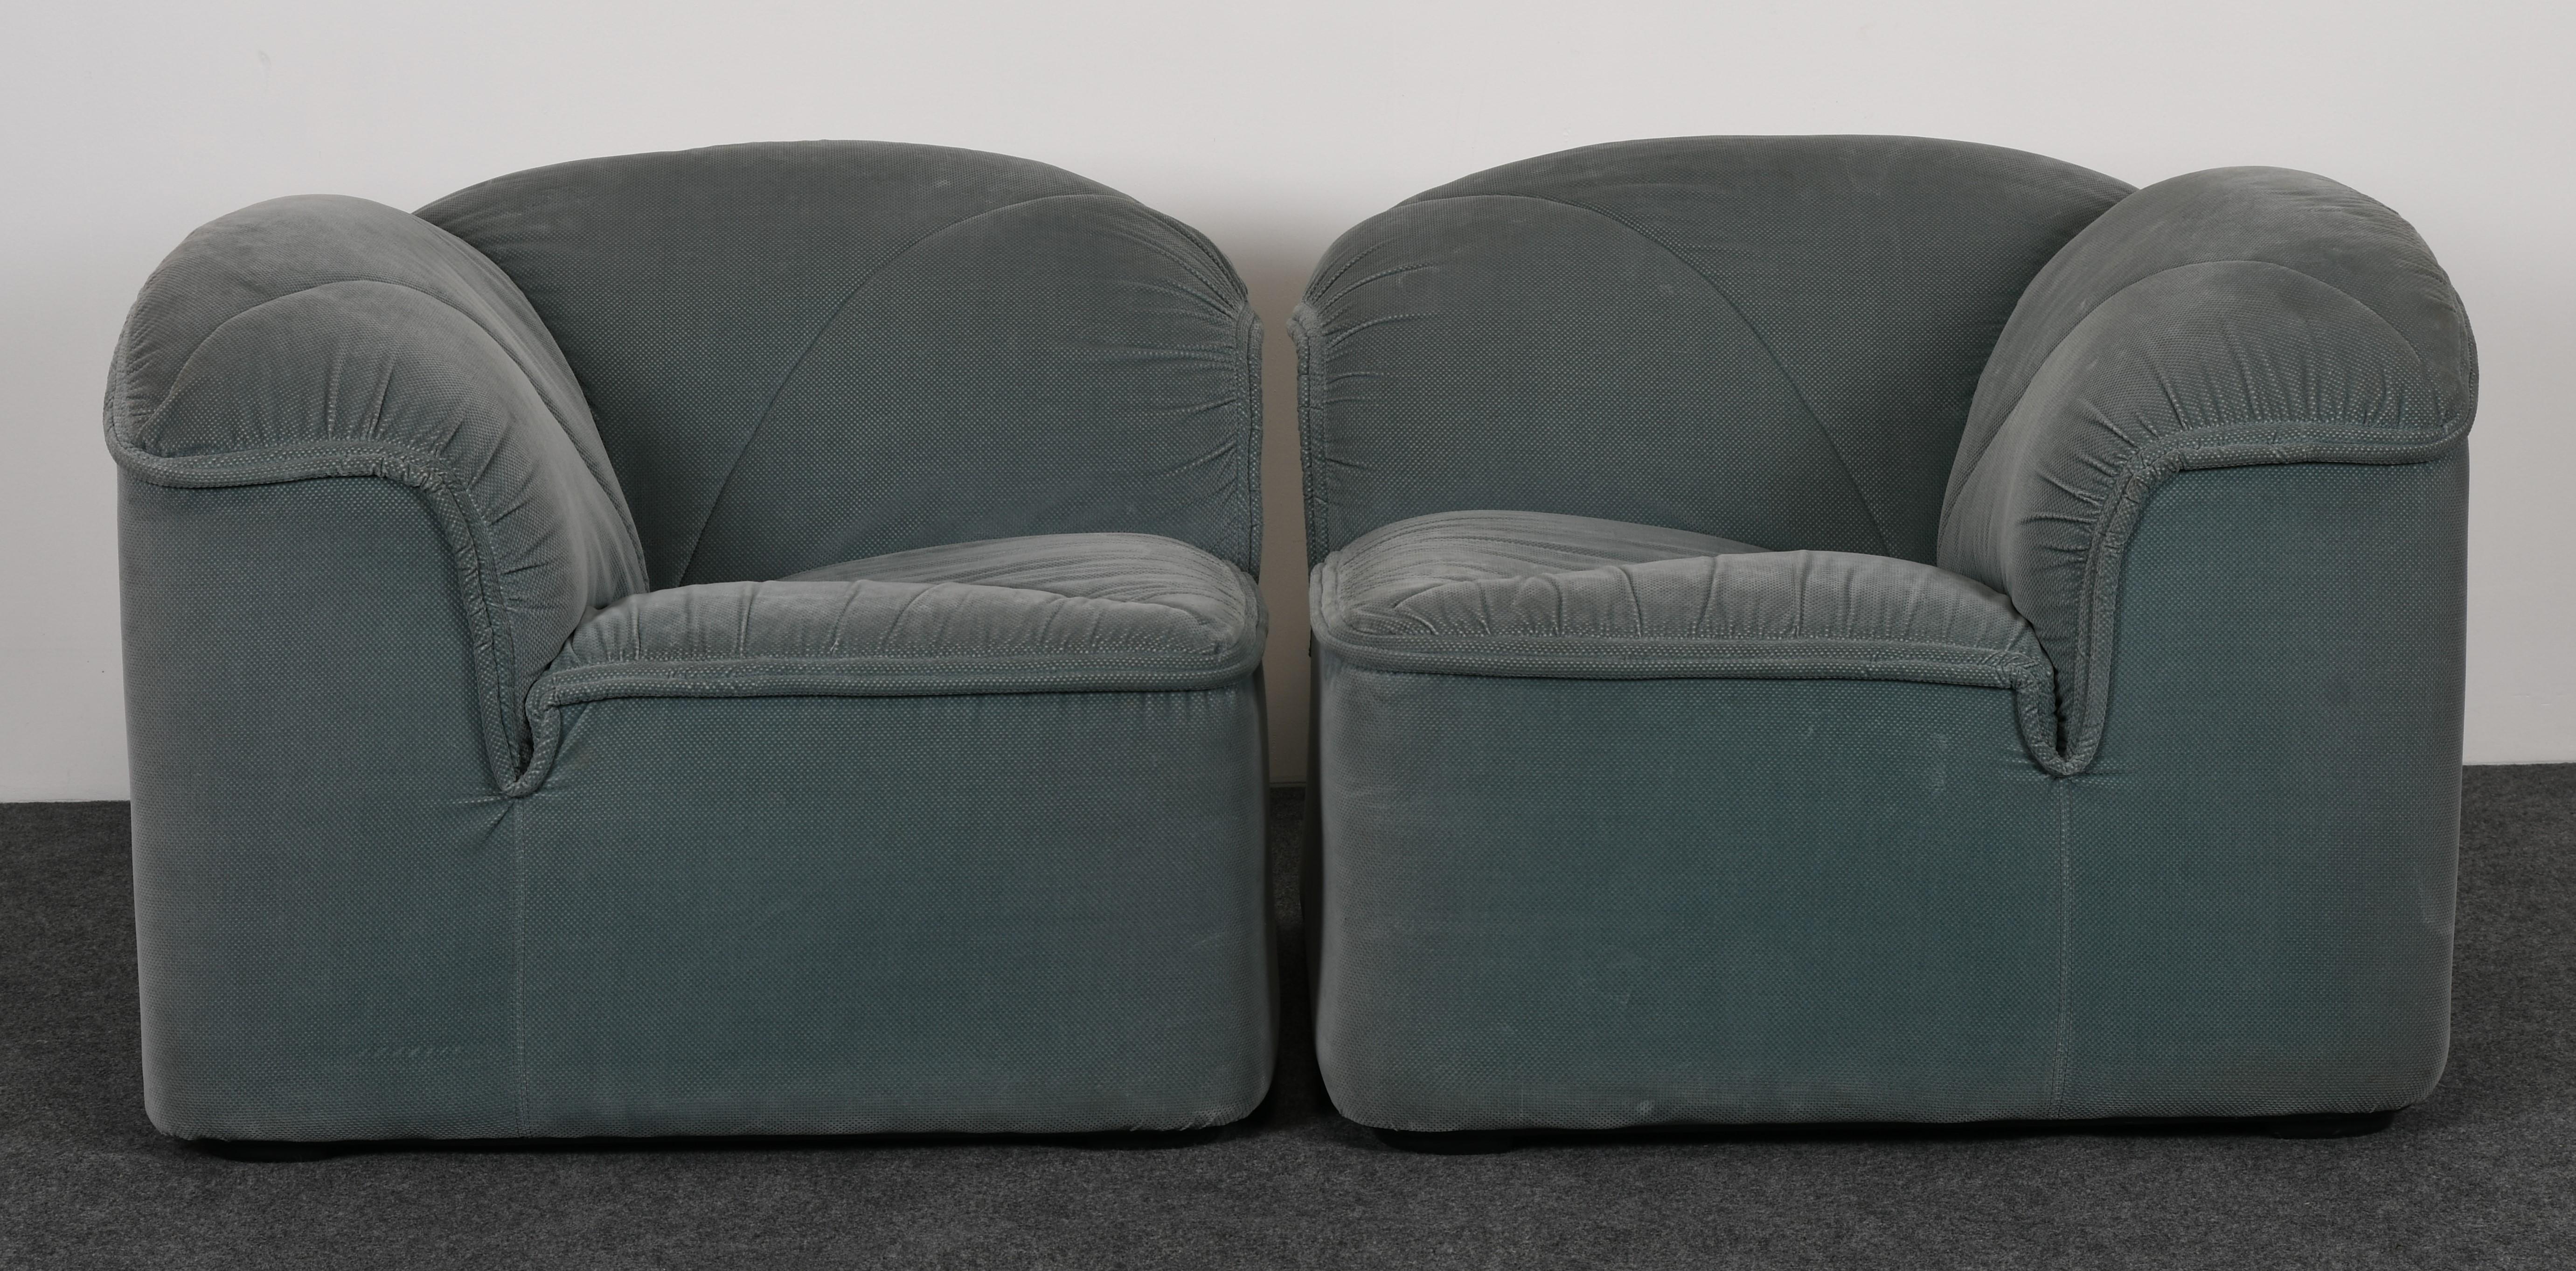 Upholstery Pair of Mariani Lounge Chairs for Pace Collection, Inc., 1970s